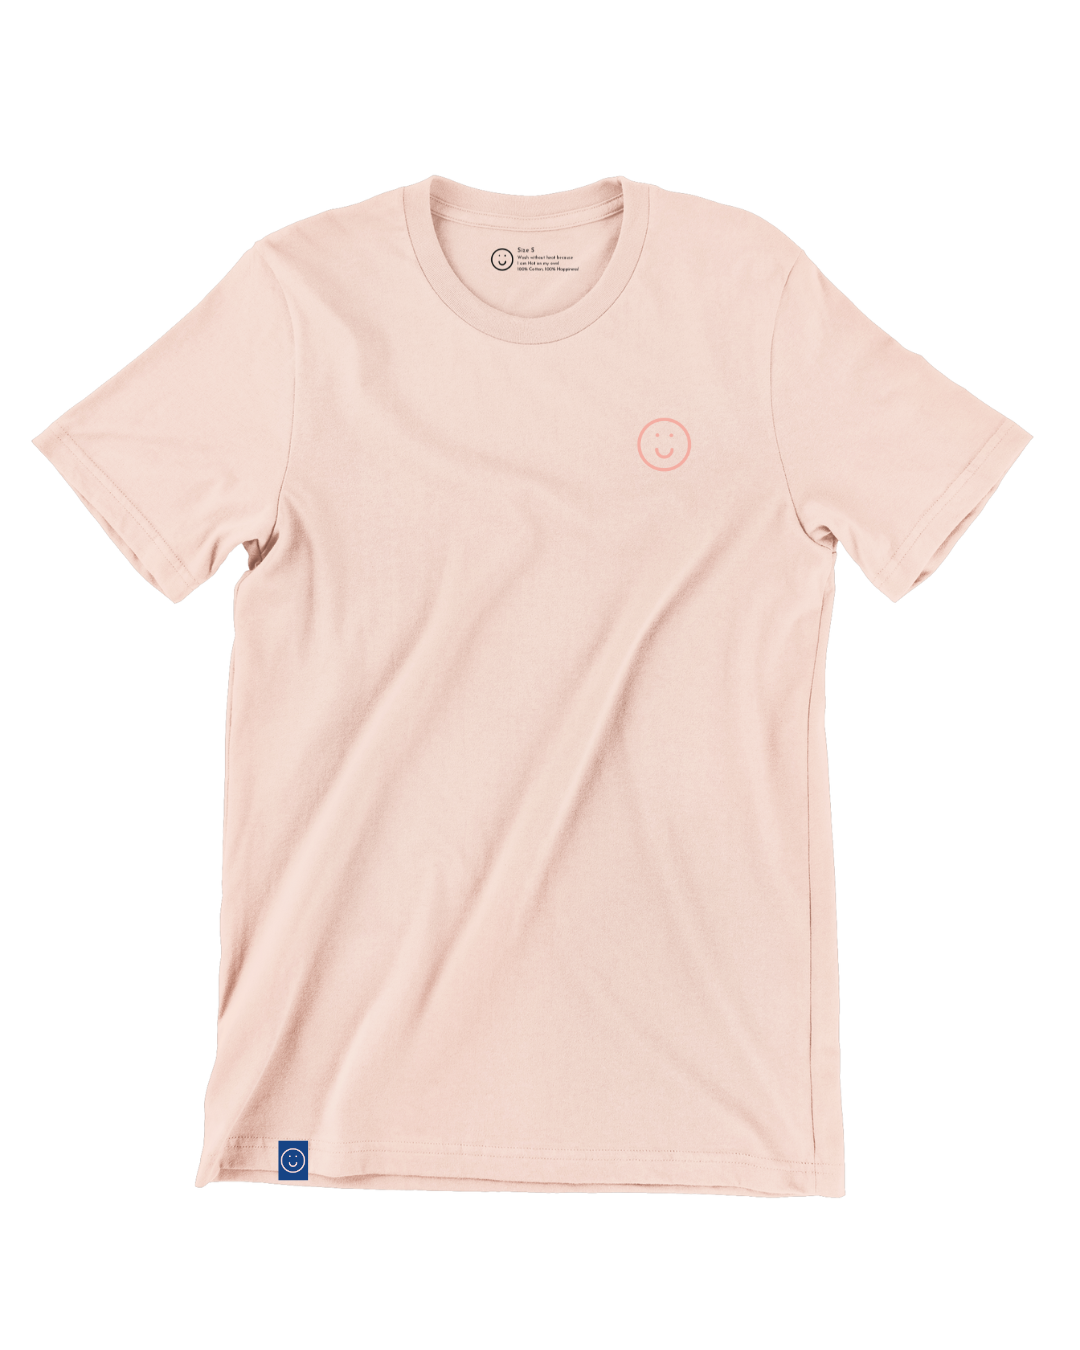 Signature Tee in Baby Pink